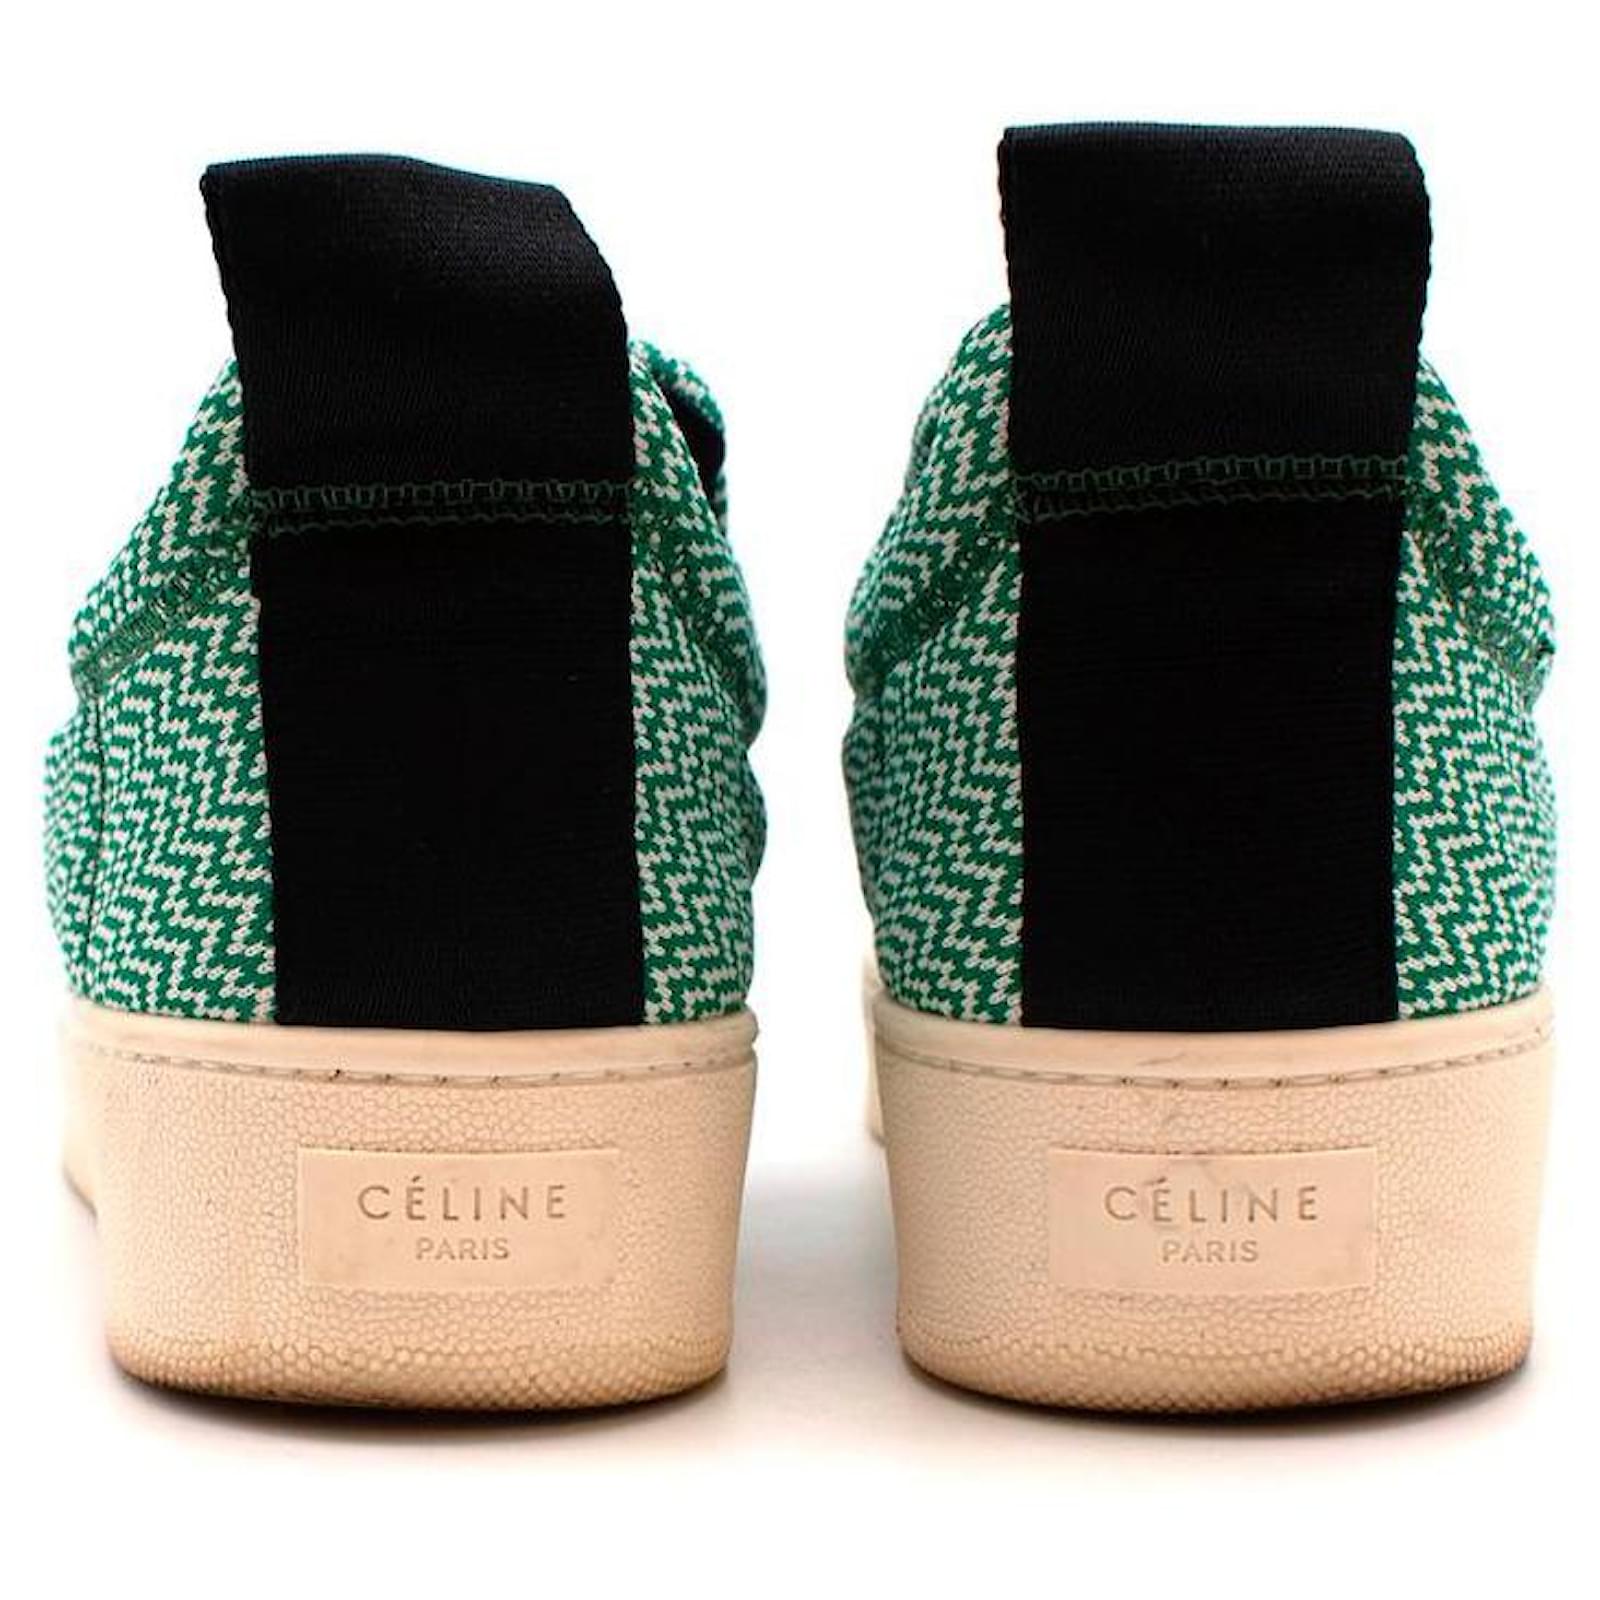 Celine by Phoebe Philo Green Knit Pull-on Trainers - Size EU 40